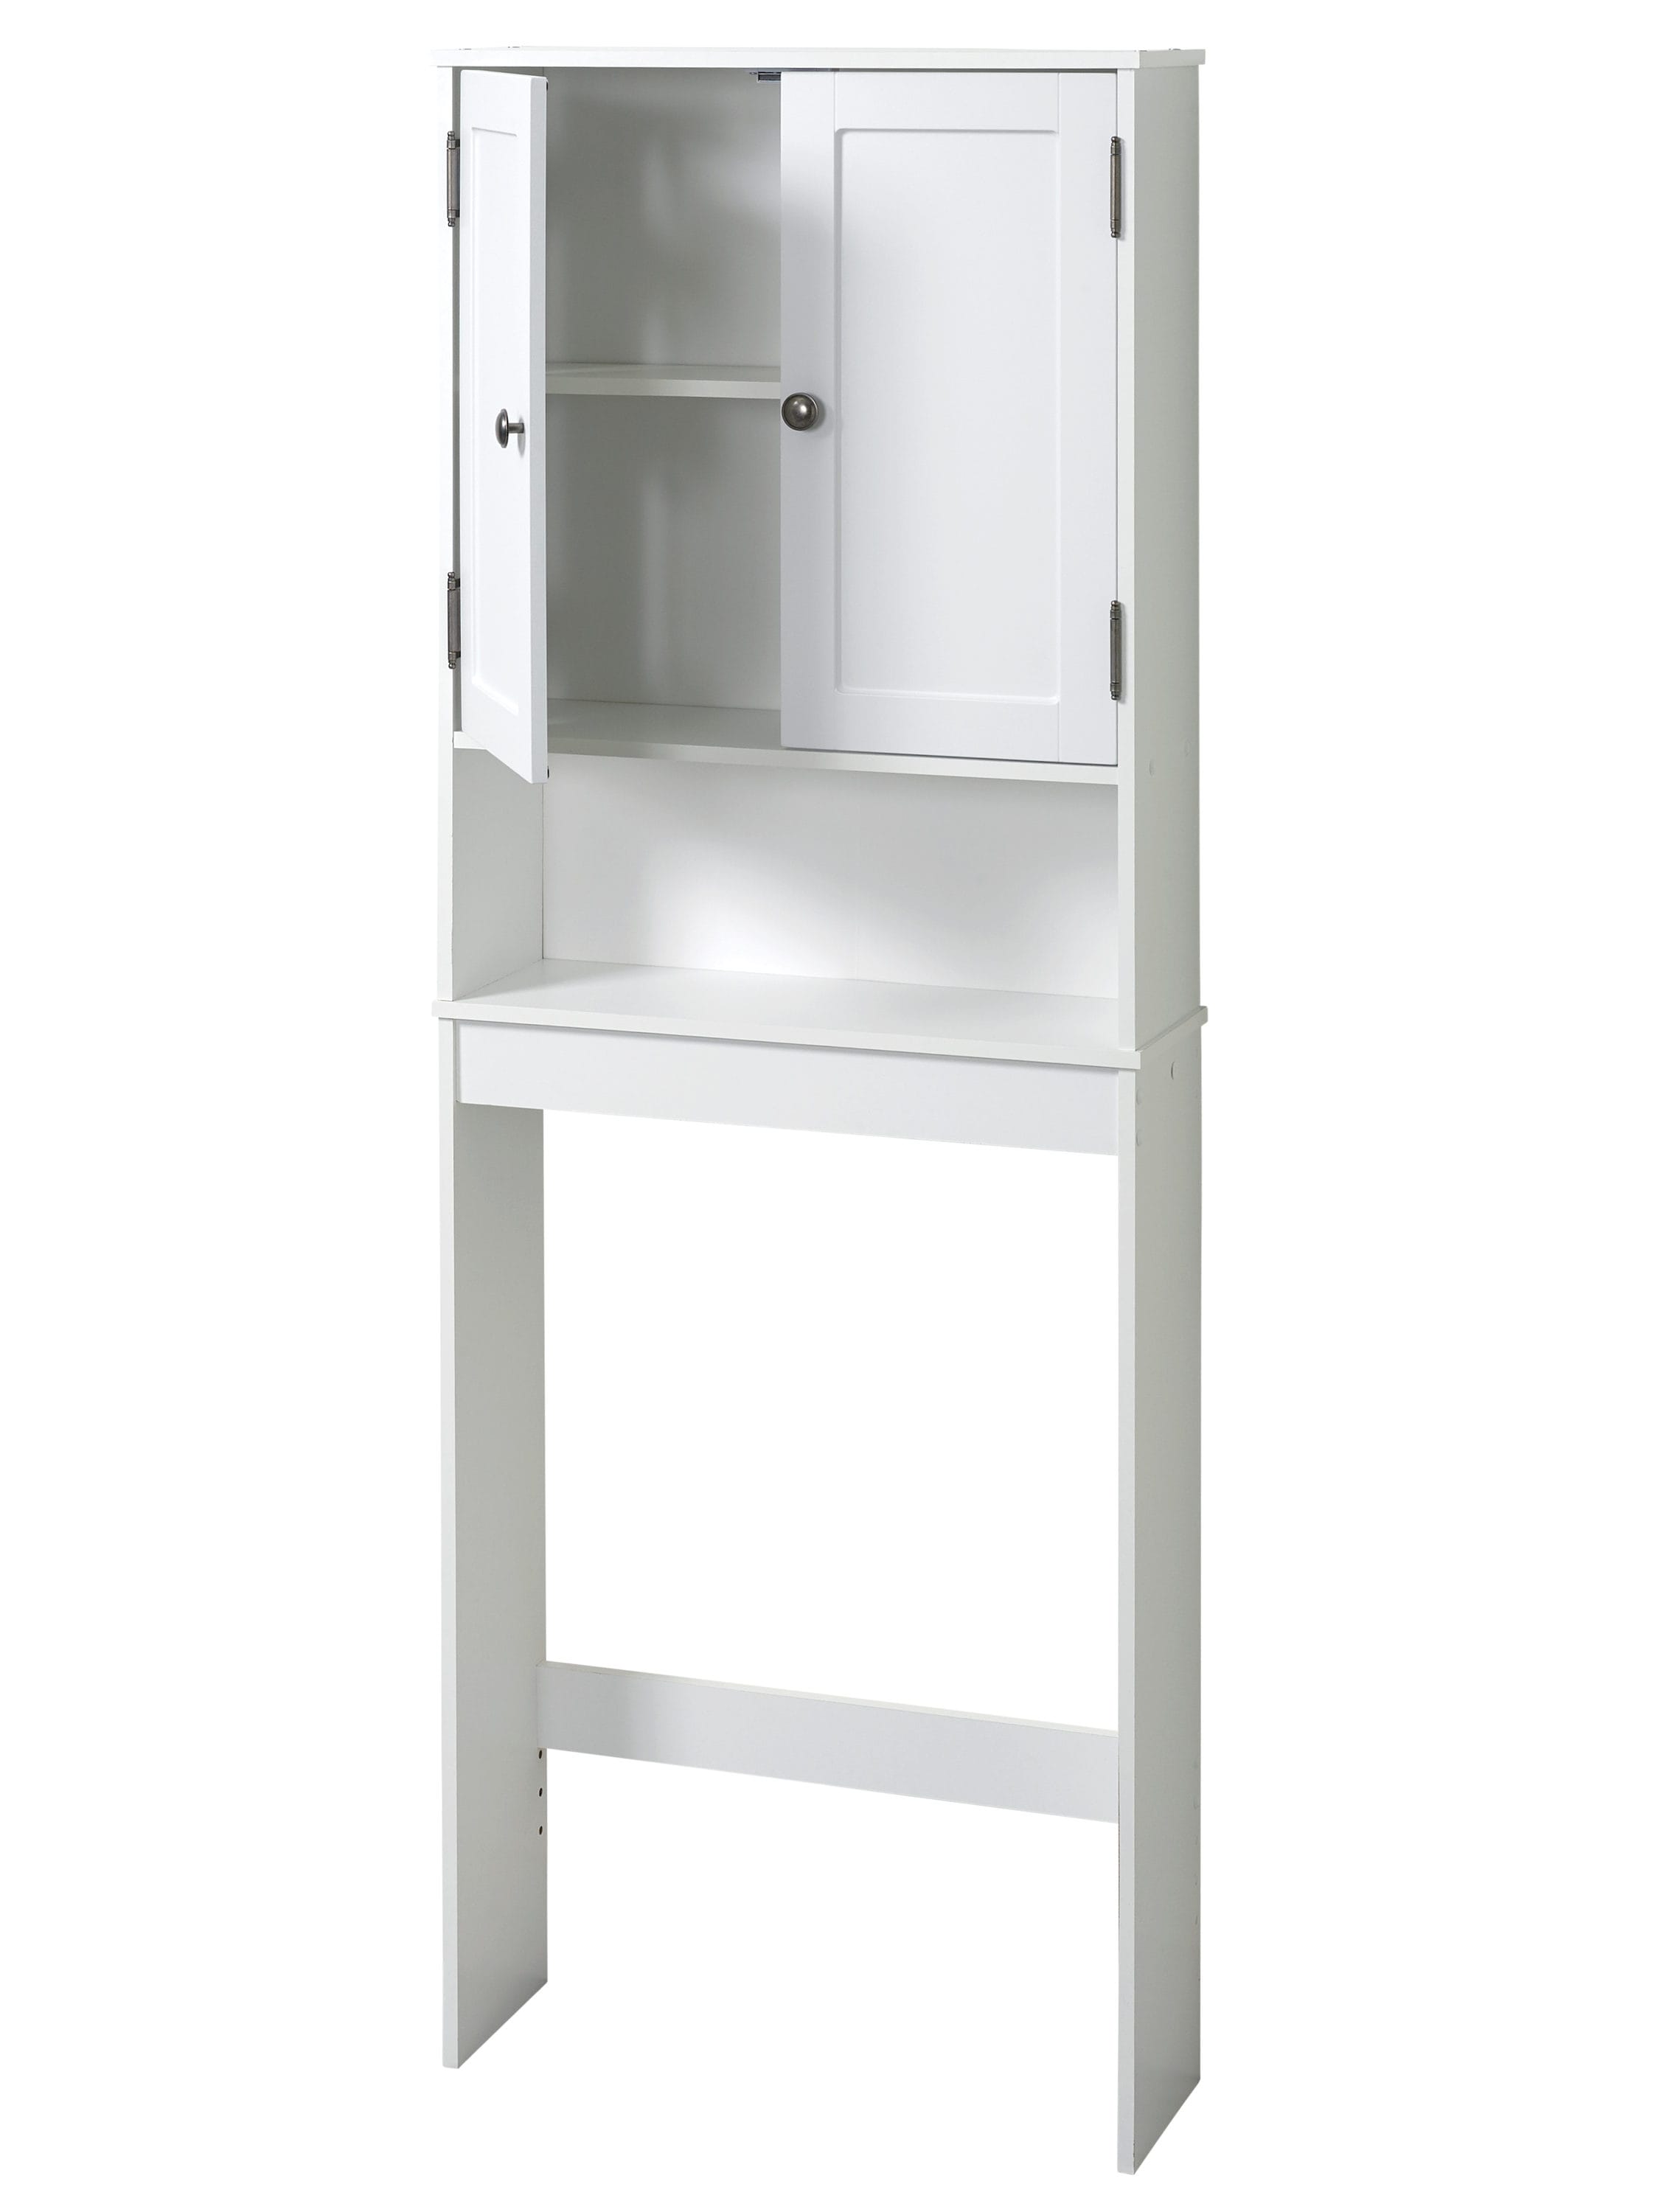 Over The Toilet Storage with 2 Doors & Adjustable Shelf, Free Standing  Toilet Rack Space-Saving Collect Cabinet, Bathroom Furniture